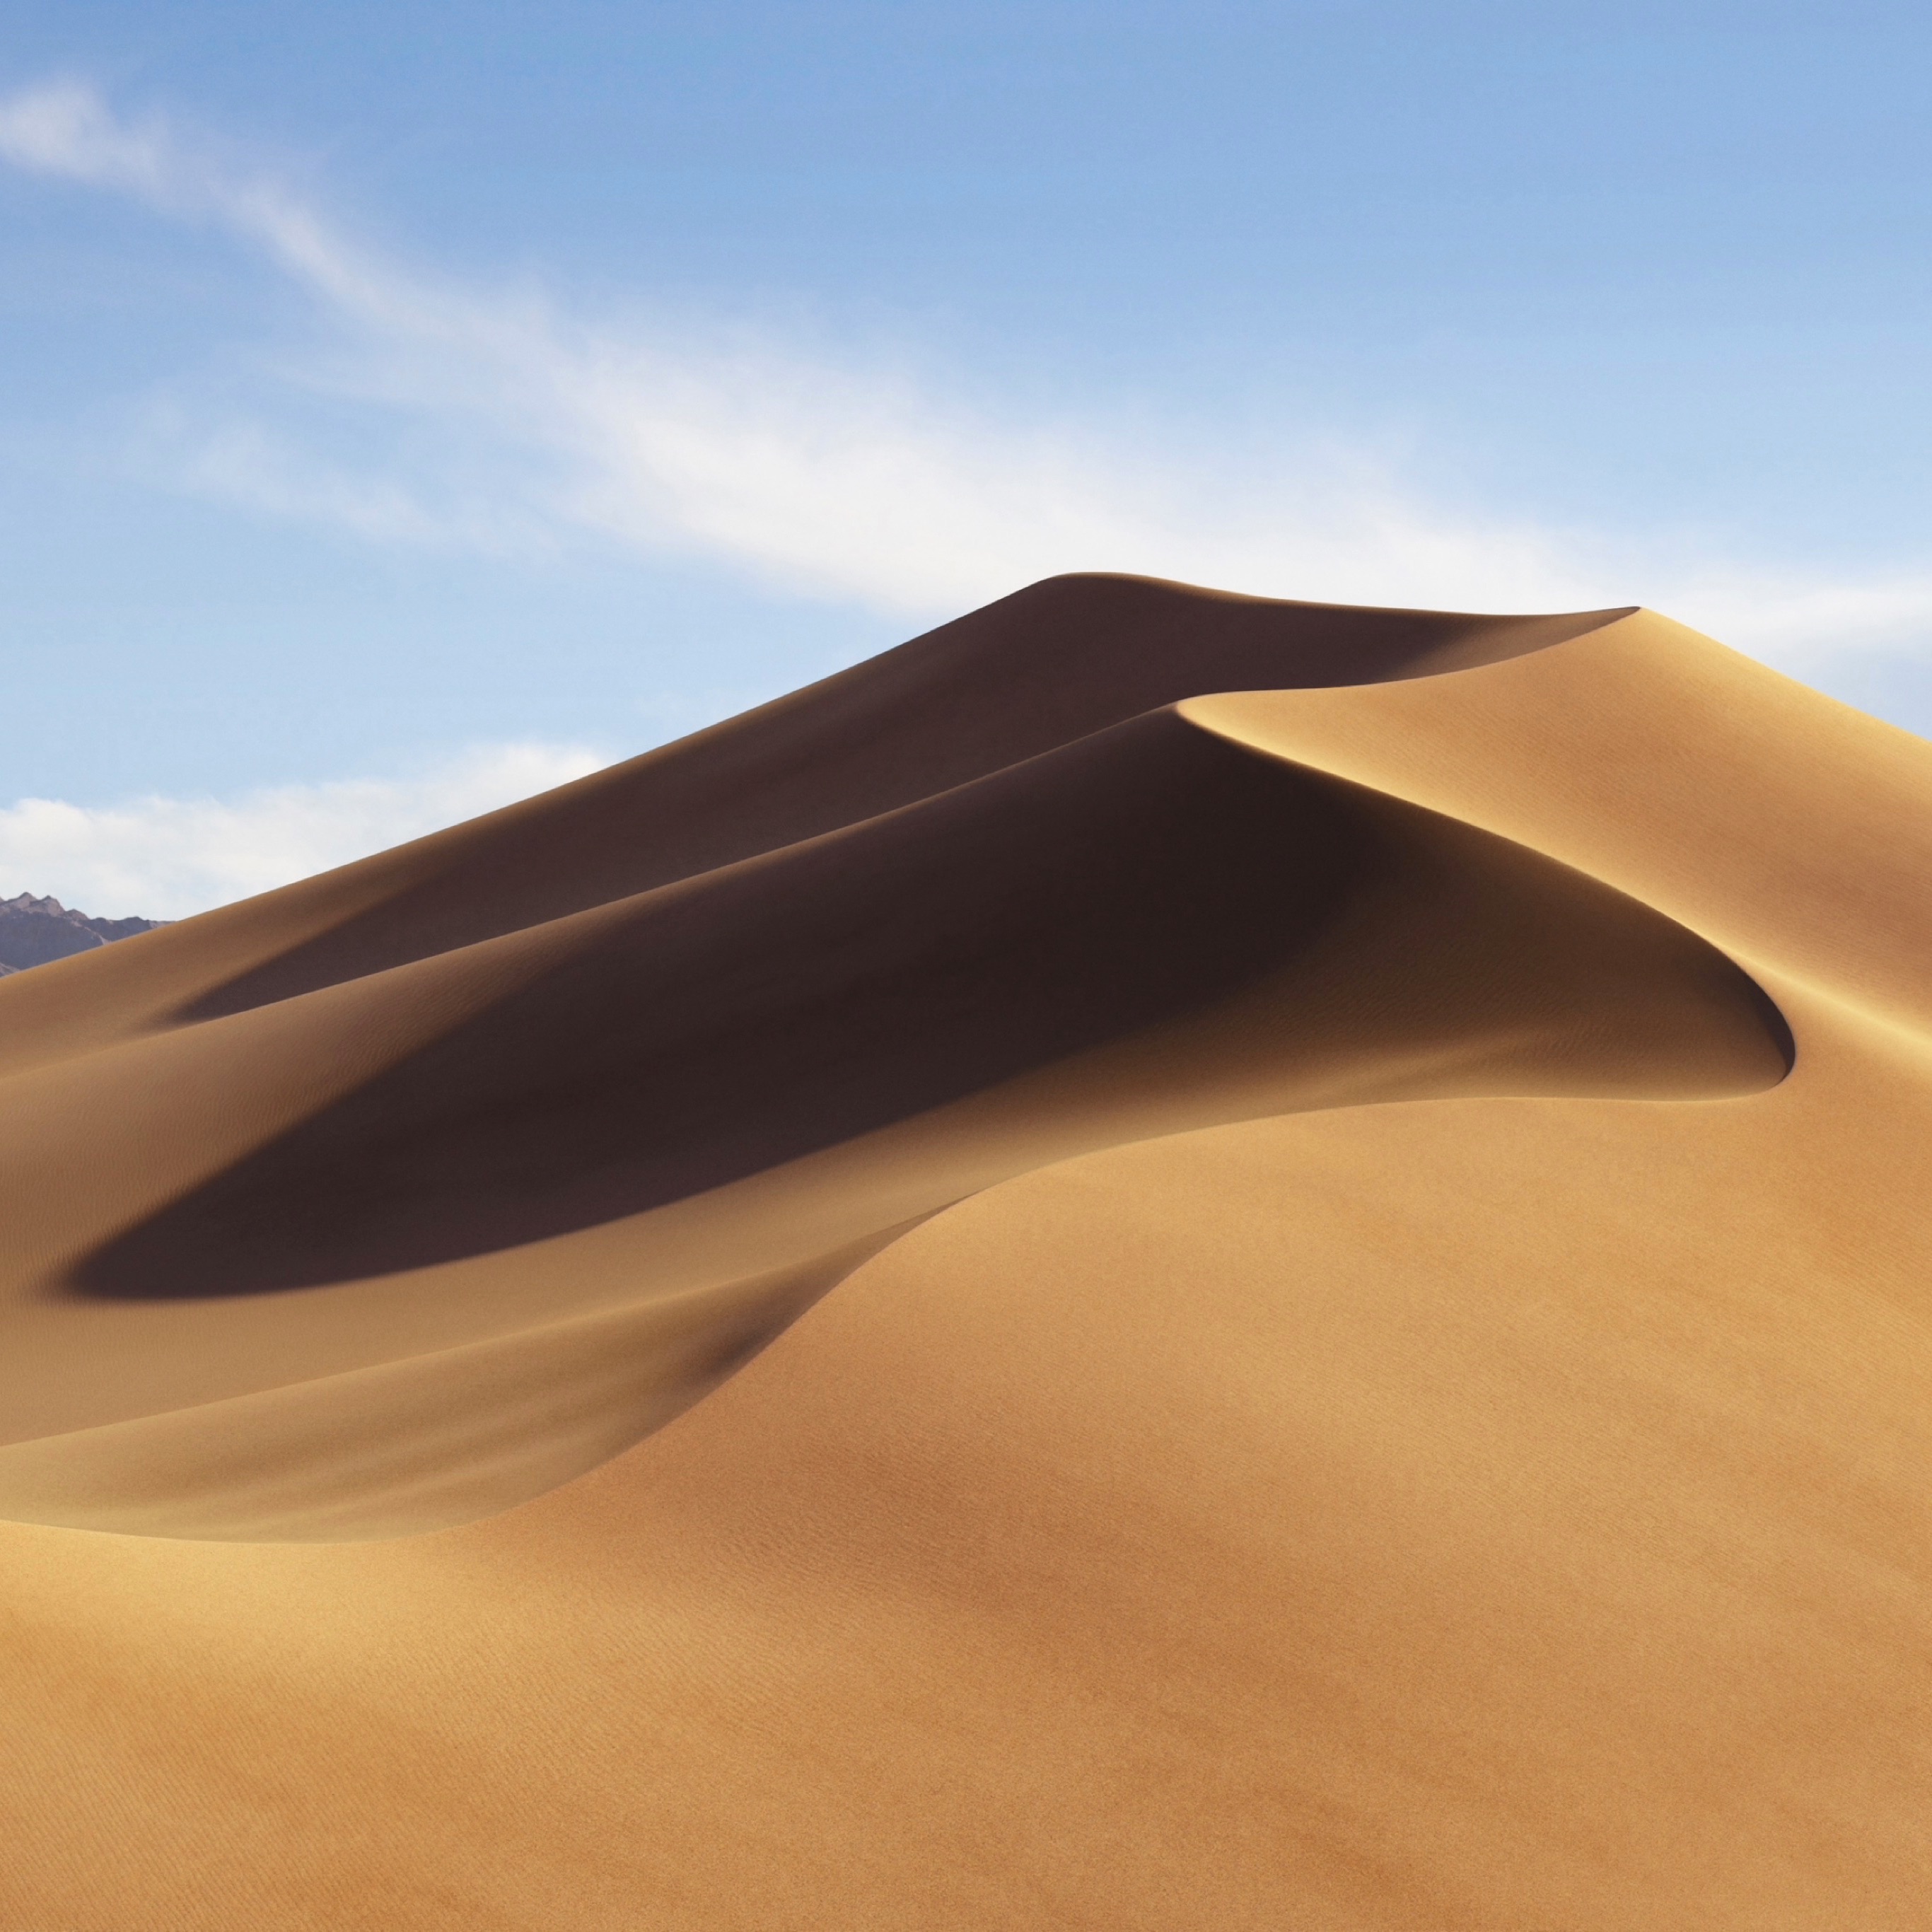 Wallpaper Weekends Macos Mojave For iPhone iPad And